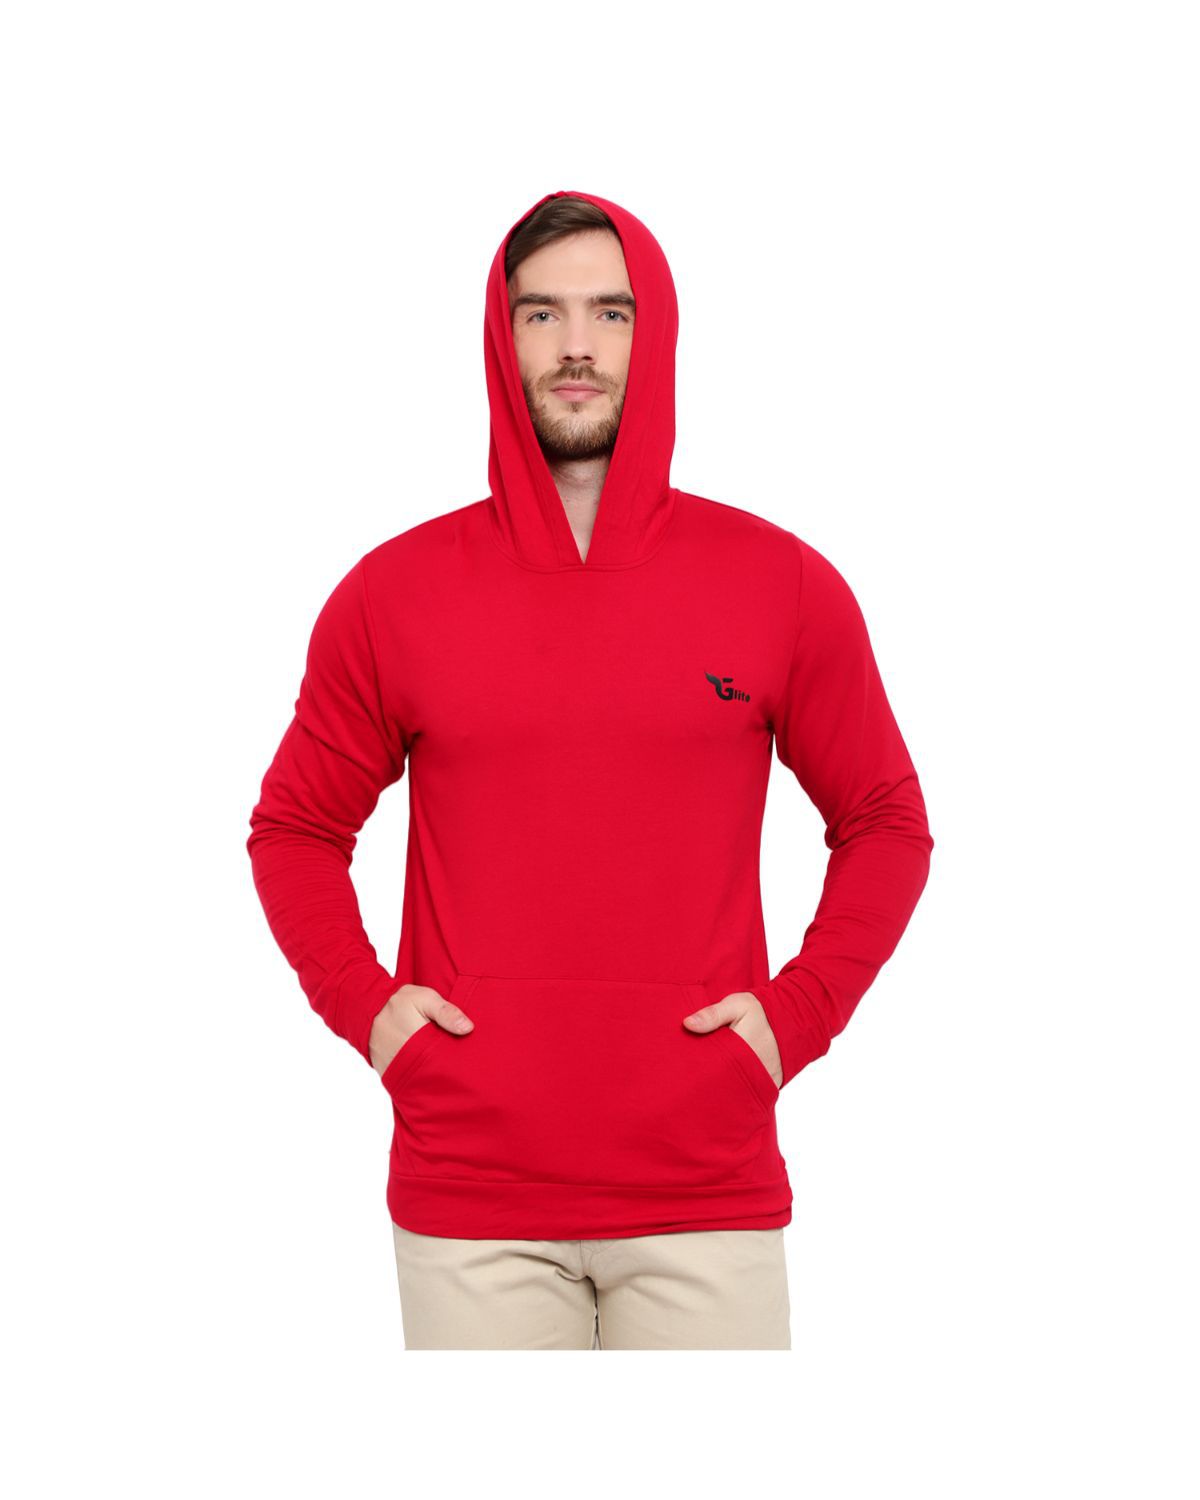     			Glito - Red Fleece Relaxed Fit Men's Sweatshirt ( Pack of 1 )